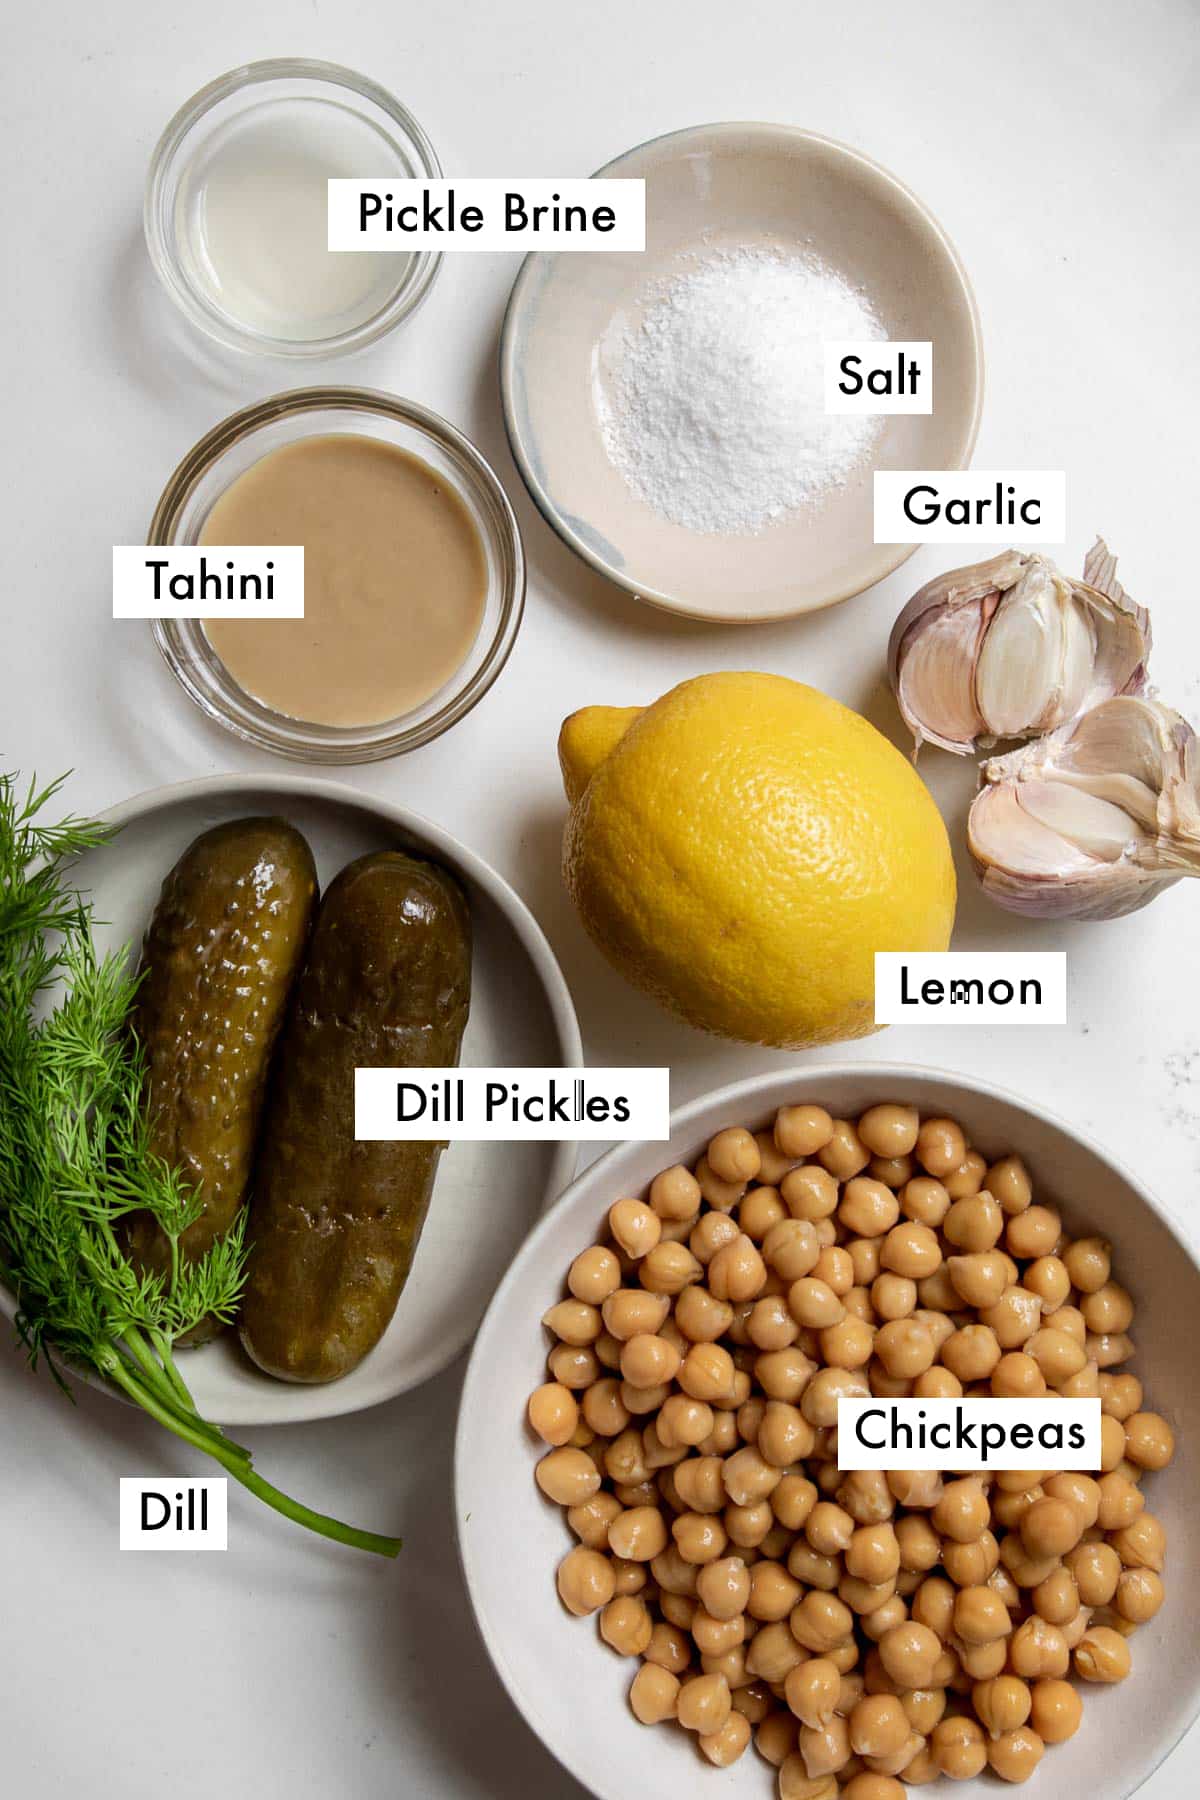 ingredients to make dill pickle hummus arranged on table.